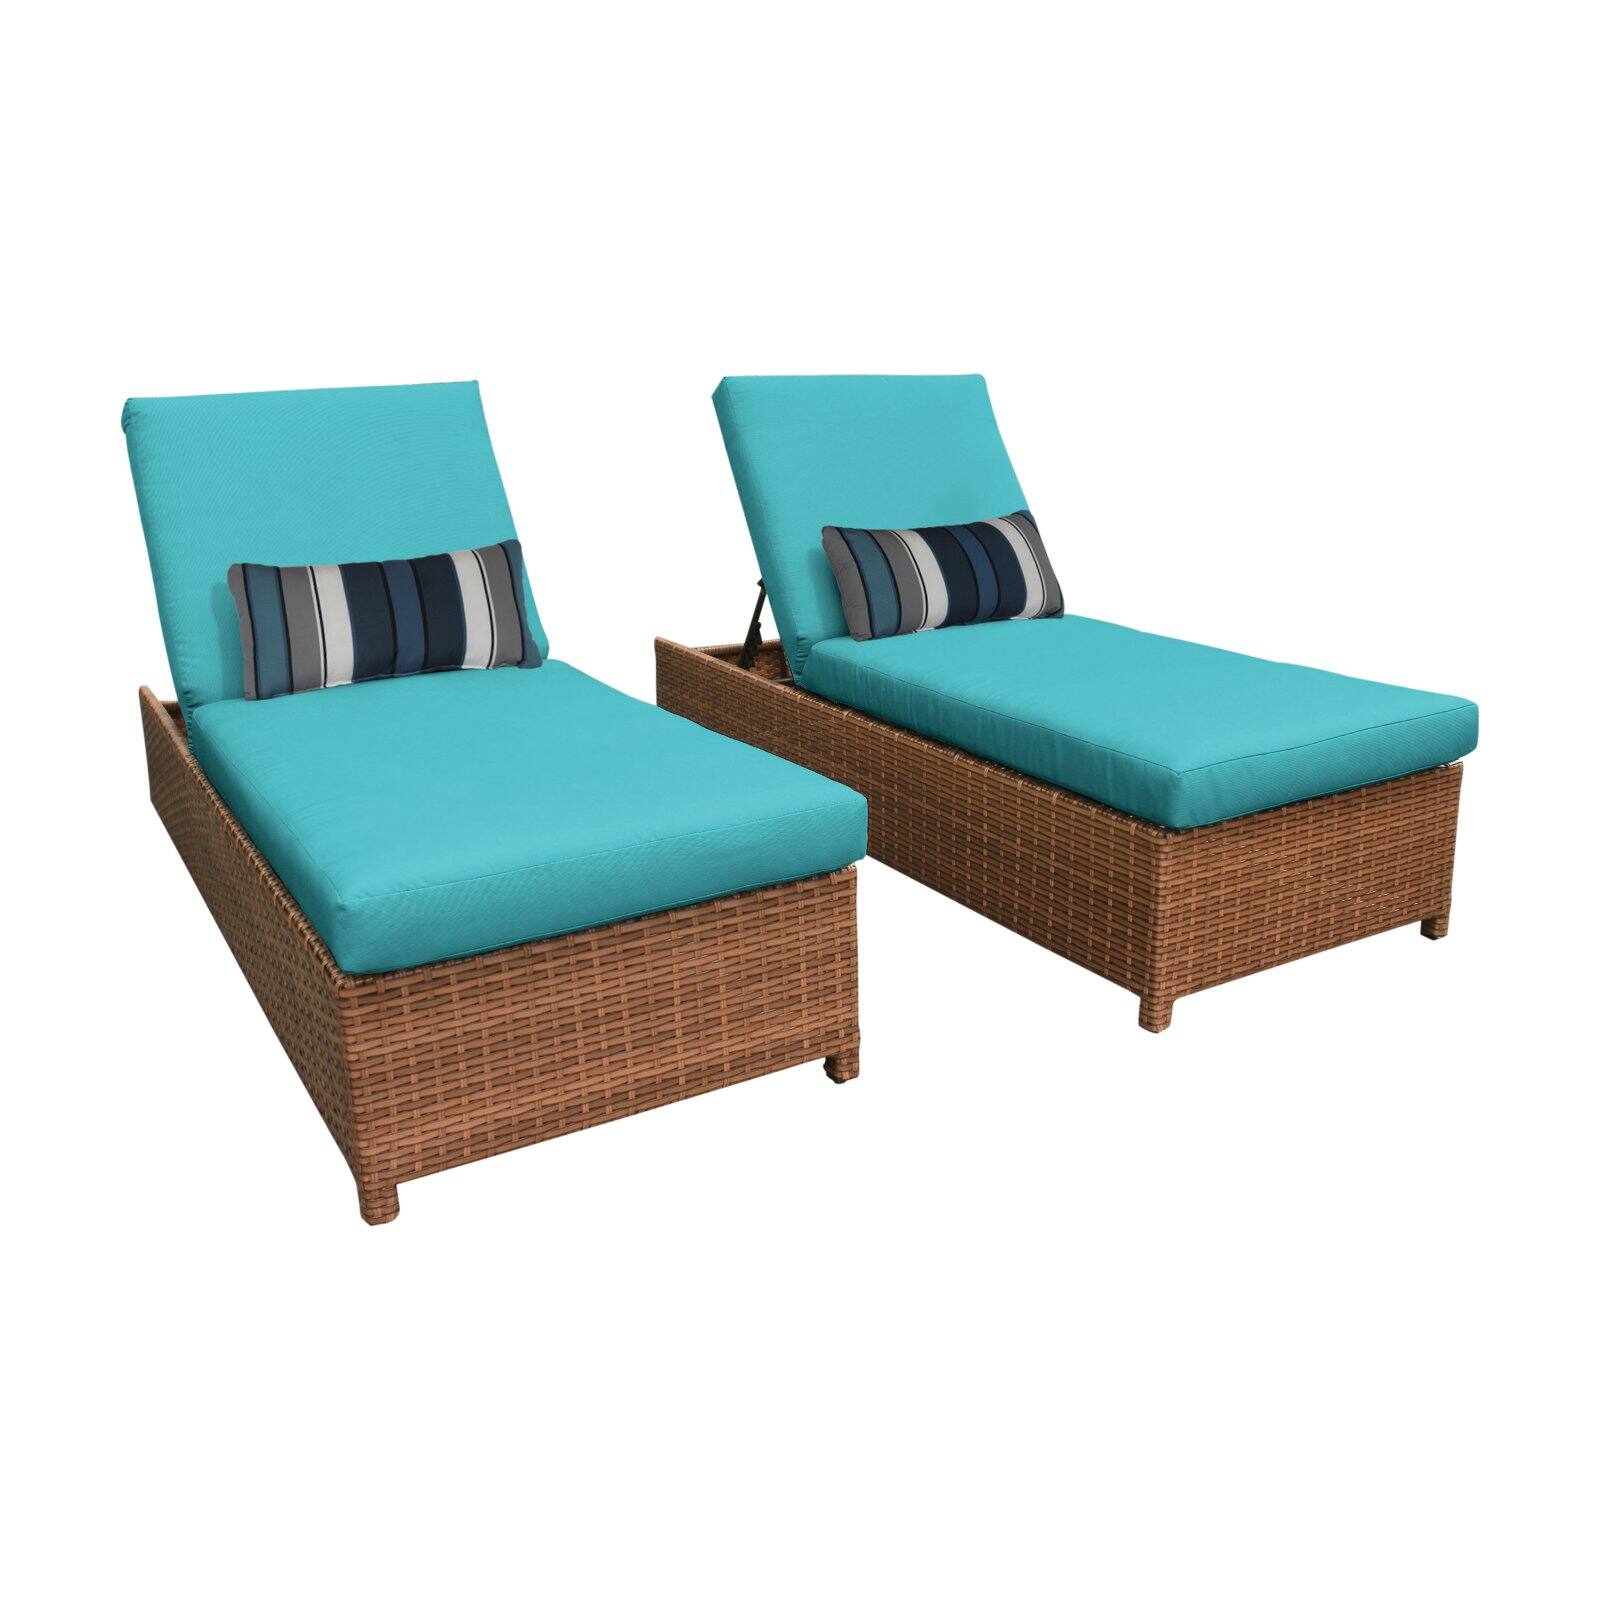 TK Classics Laguna Wheeled Wicker Outdoor Chaise Lounge Chair - Set of 2 - image 1 of 11